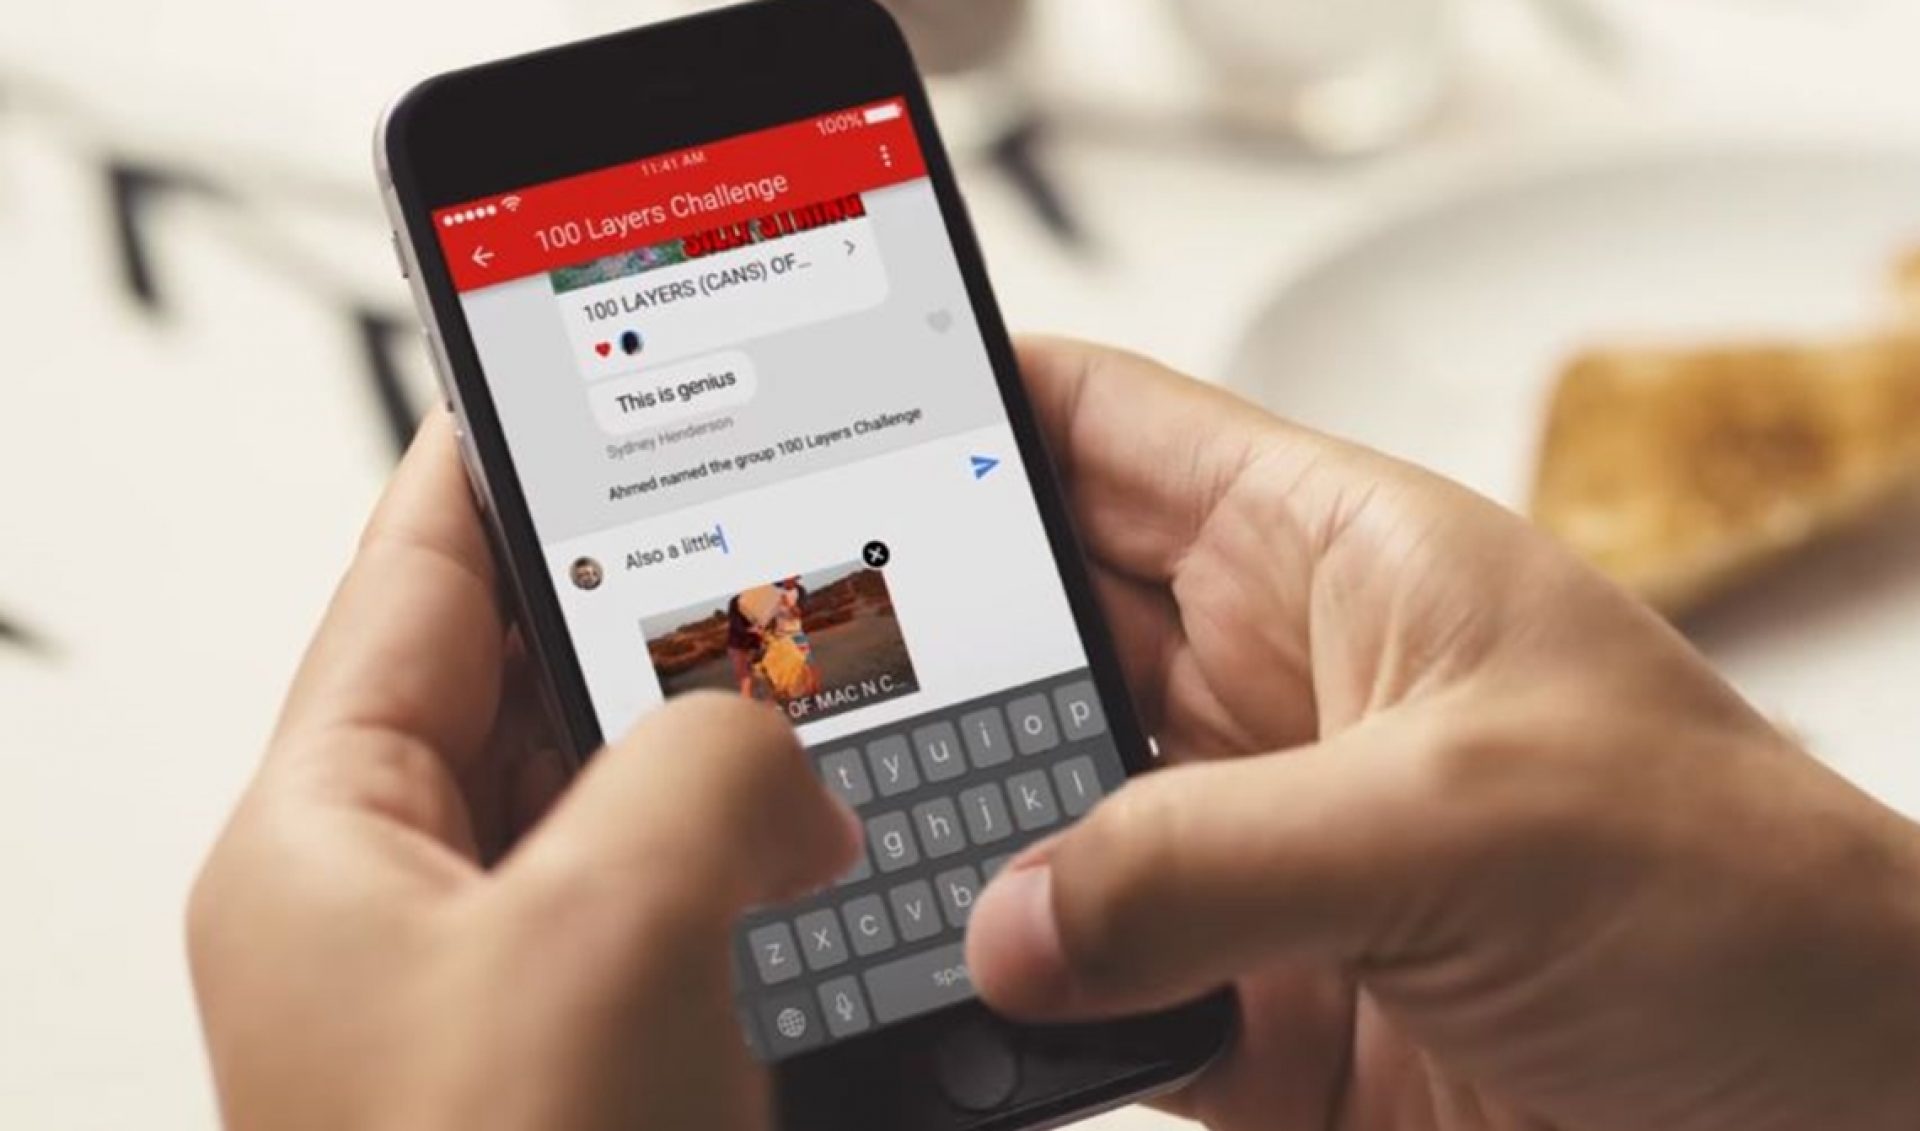 Native Video-Sharing And Chat Feature Rolls Out To YouTube App Globally